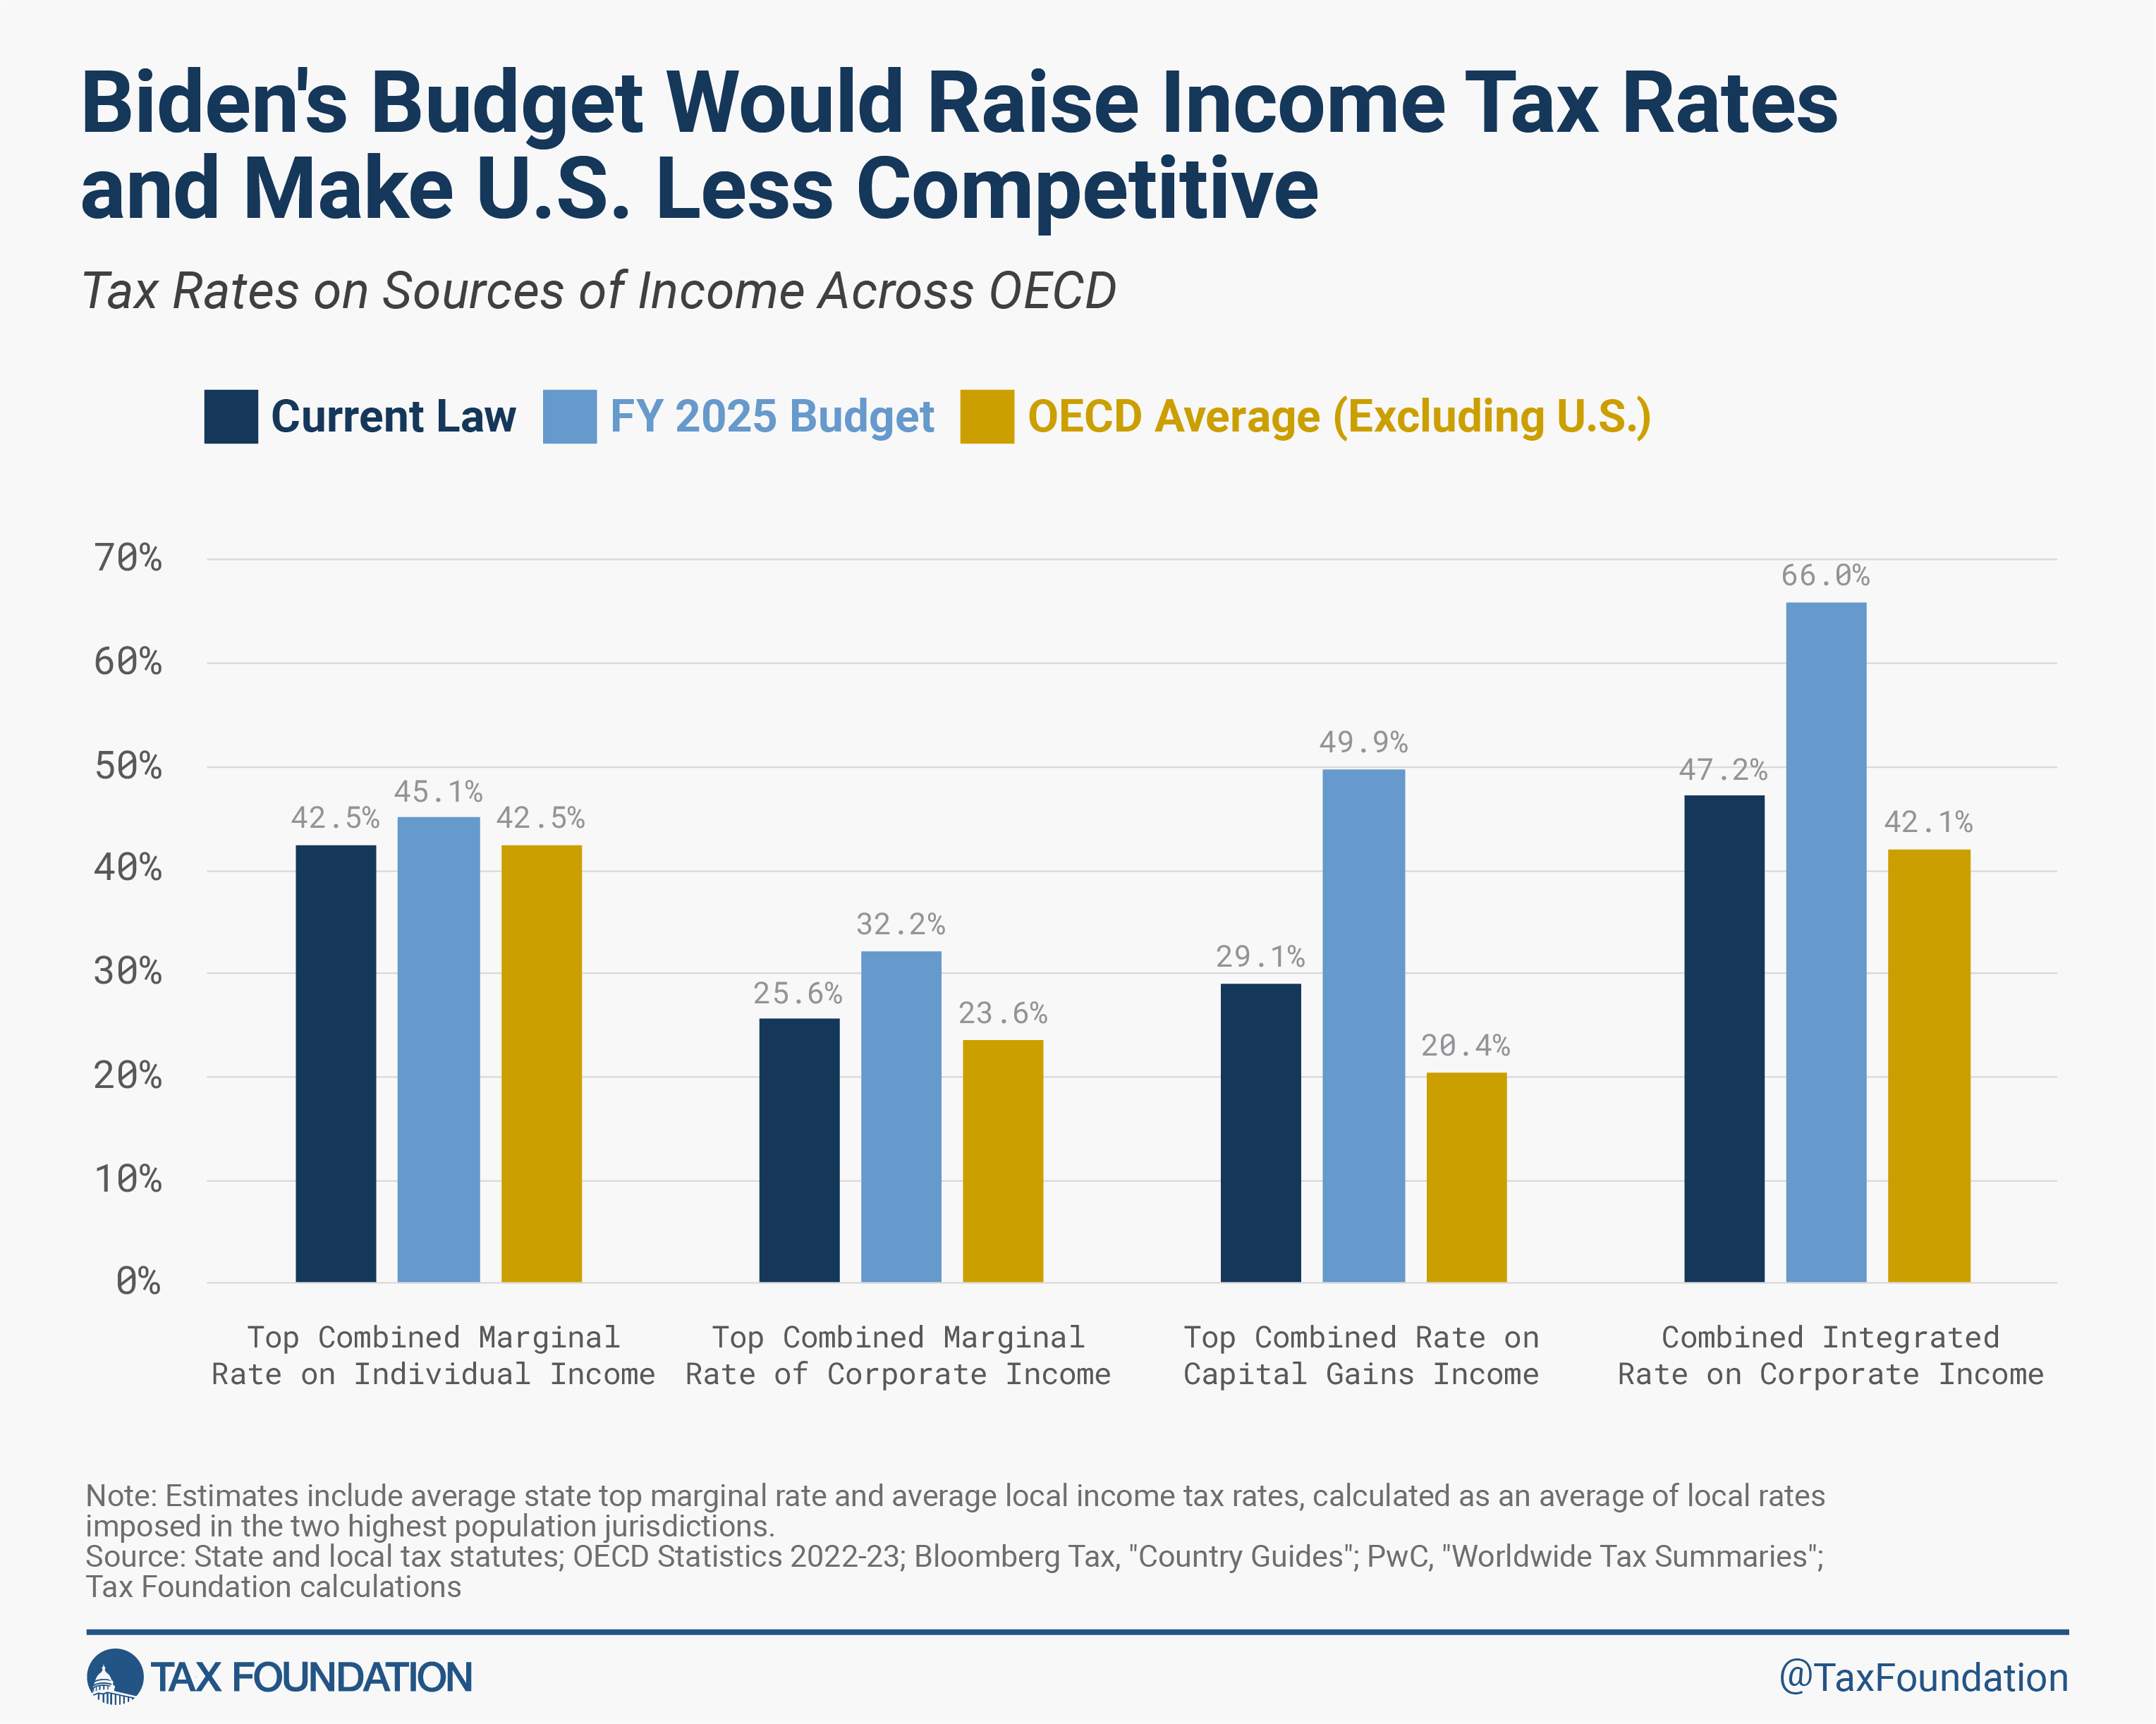 US income tax rates international comparision and US competitiveness under FY 2025 Biden budget tax proposals